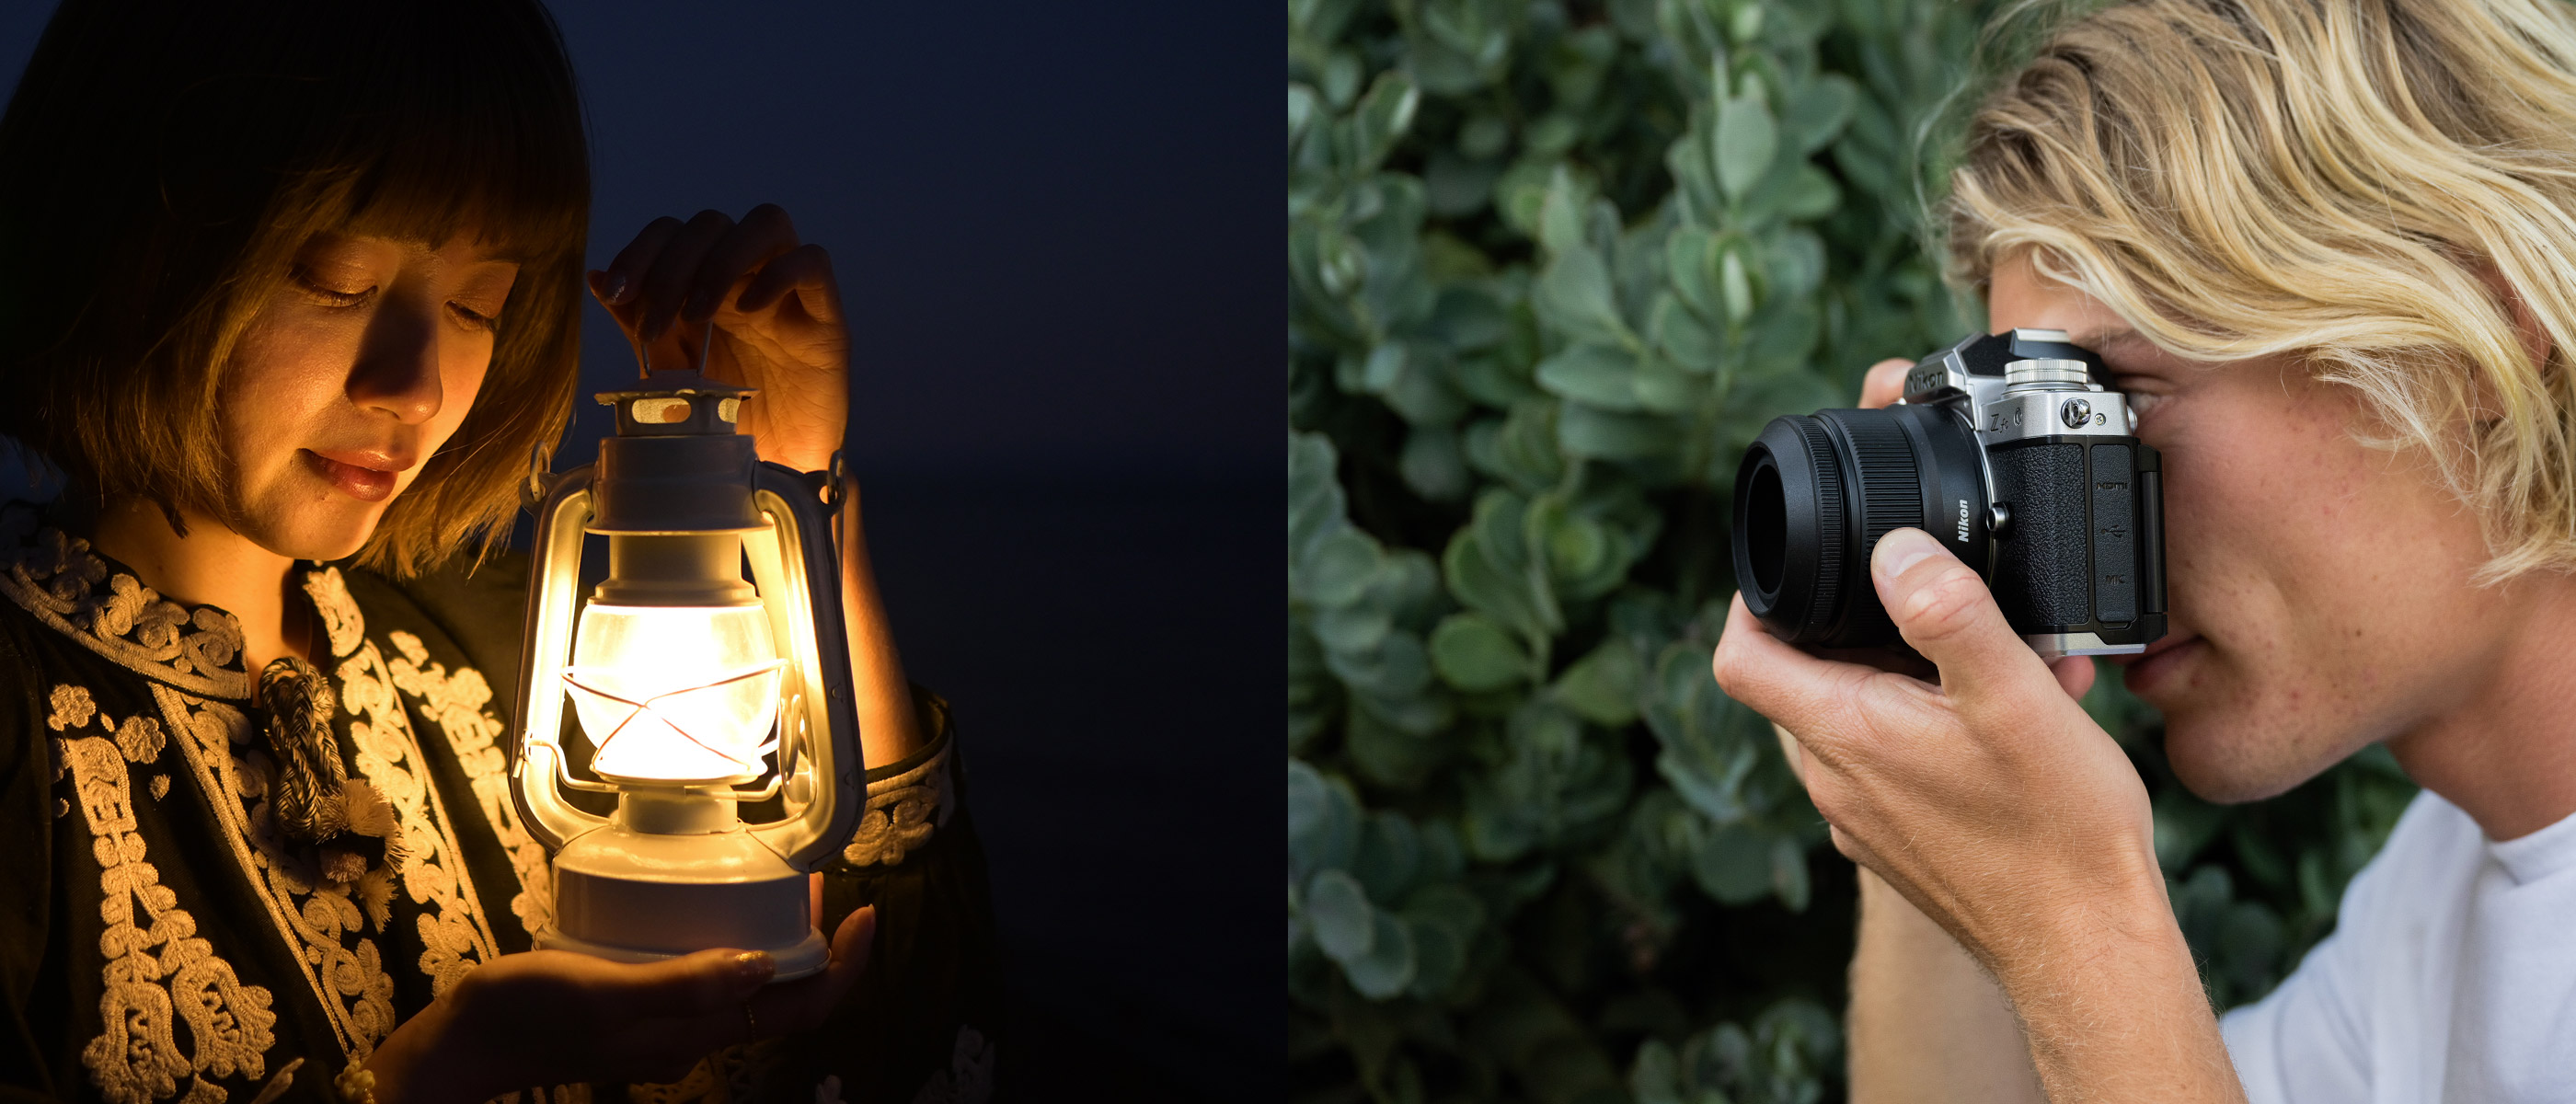 Photo of a woman at night with a lantern taken with the NIKKOR Z DX 24mm f/1.7 lens next to a photo of a blonde person holding a camera and lens up to their face